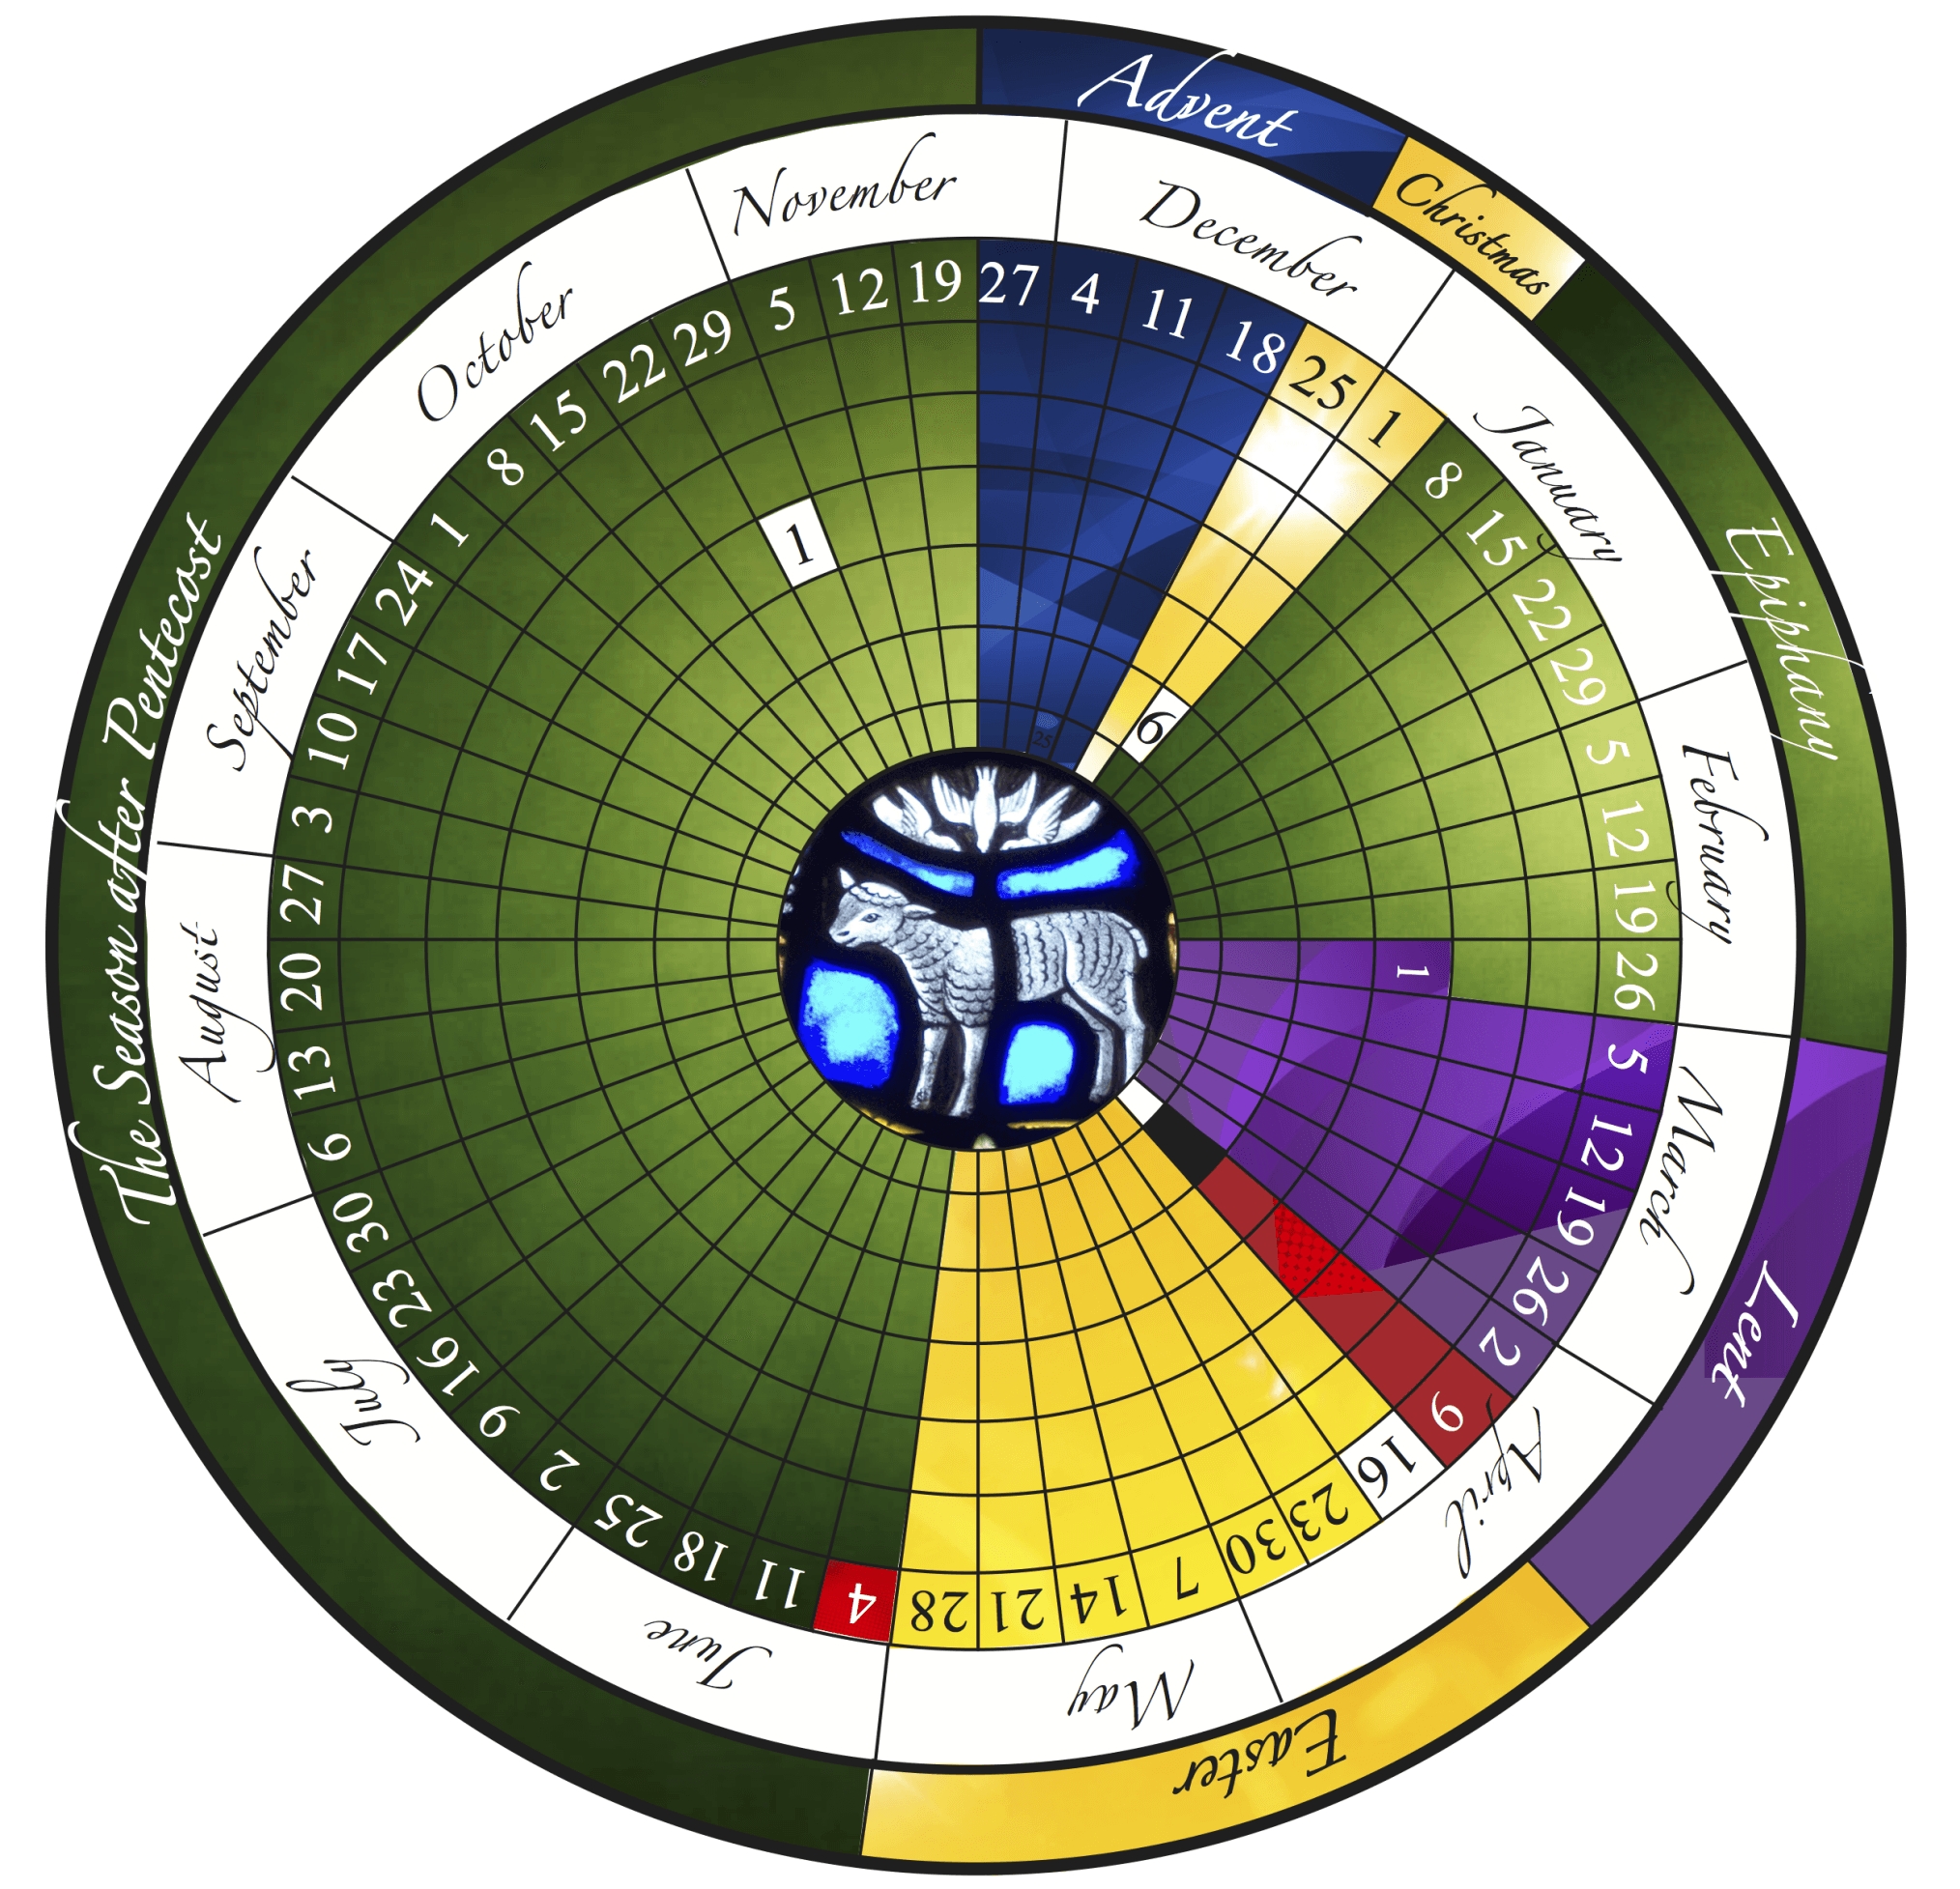 The Liturgical Year Explained (Plus Free Printable Calendar!)-Catholic Liturgical Year 2021 Printable